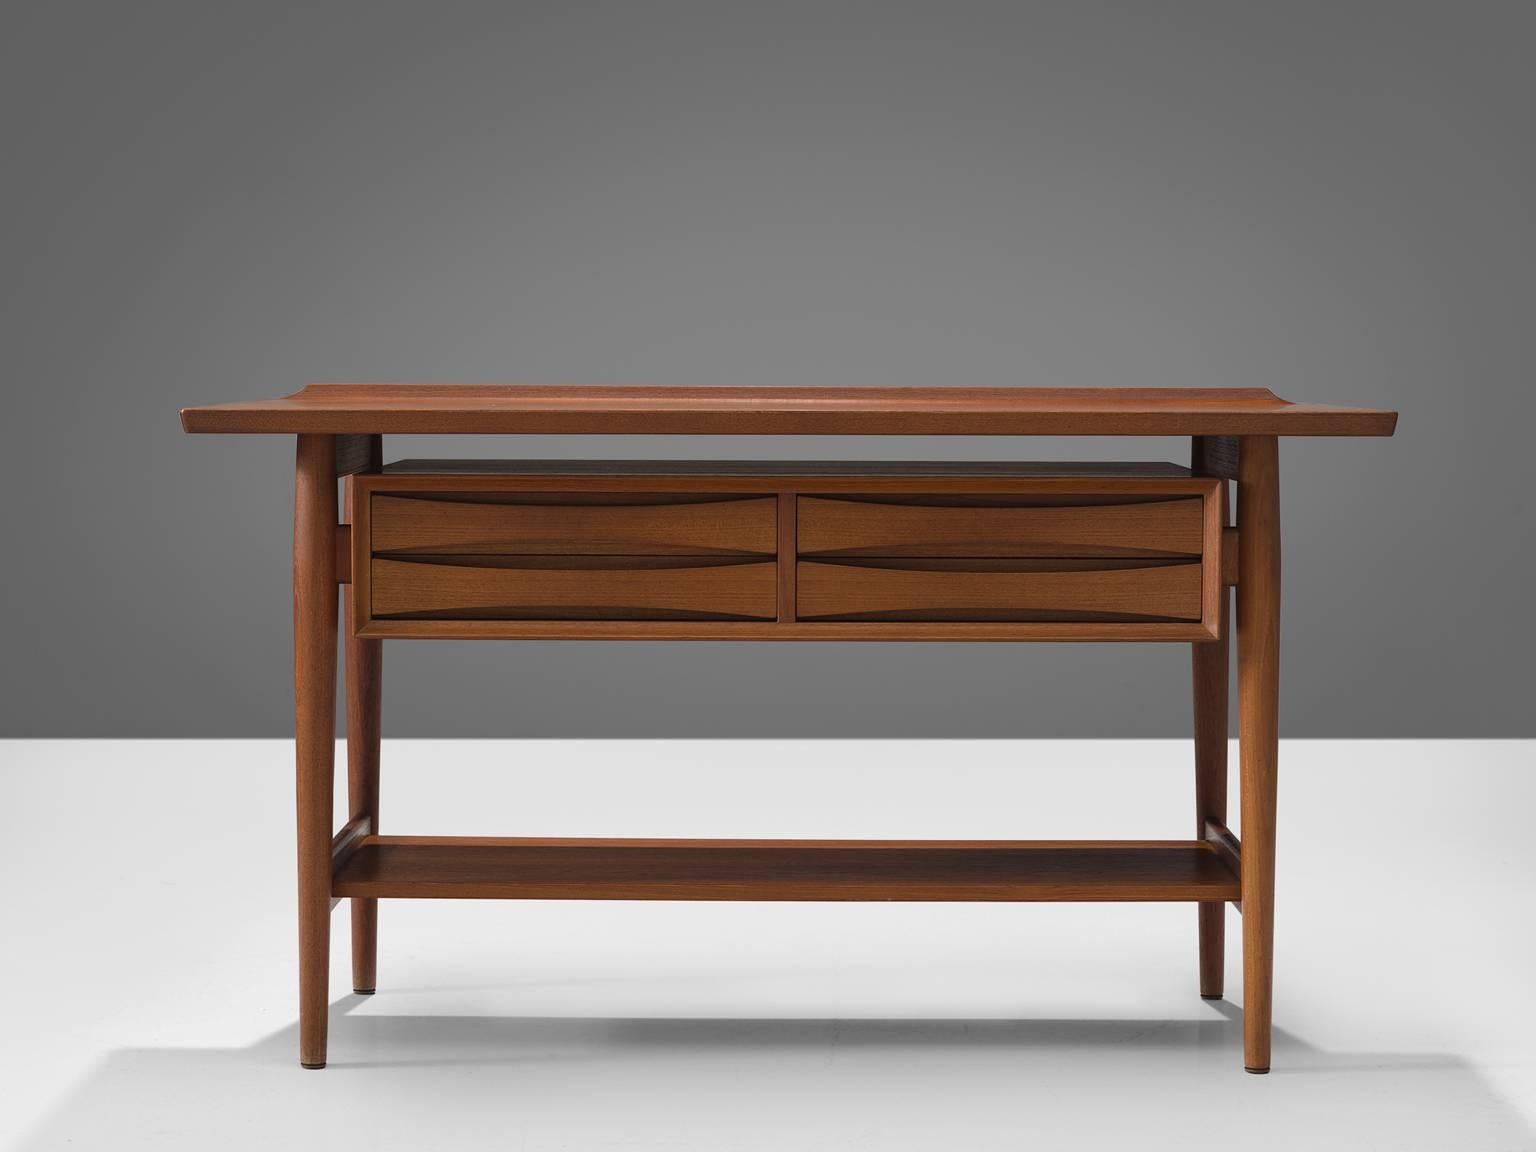 Arne Vodder for Sibast Møbler, console table, teak, Denmark, 1960s.

This console table in teak is designed by the Danish designer Arne Vodder. The typical refined Vodder details can be found on this piece such as the characteristic drawers with